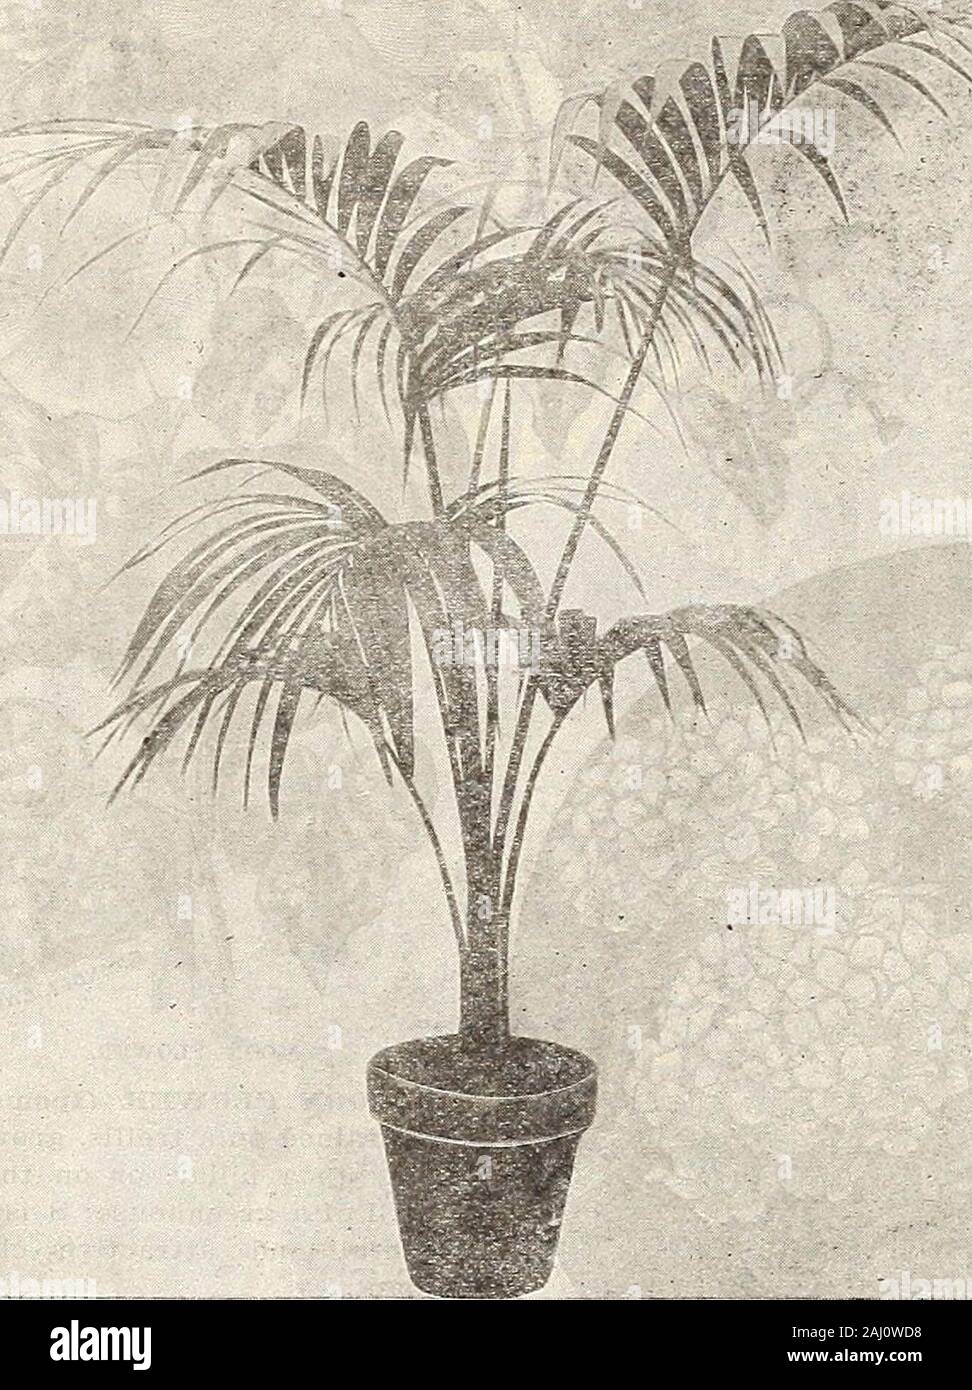 Farm and garden annual : spring 1907 . CHINESE PEIMEOSB. 96 CURRIE BROTHERS COMPANY, MILWAUKEE, WIS. IE. ^ KEXTIA BELMOKKANA. The presence of a beautiful plant lends thefinishing touch to a beautiful room. The kindof plant will connplete or destroy the harmo-nious ensemble of its fittings. The room whosegeneral make-up is one-of dignity, poise andquiet beauty requires the complement of aplant of dignified, stately character; the roomof lighter setting- is best completed with aplant of no less beauty but of less pronouncedstateliness of character. How much is thebeauty of a massive staircase en Stock Photo